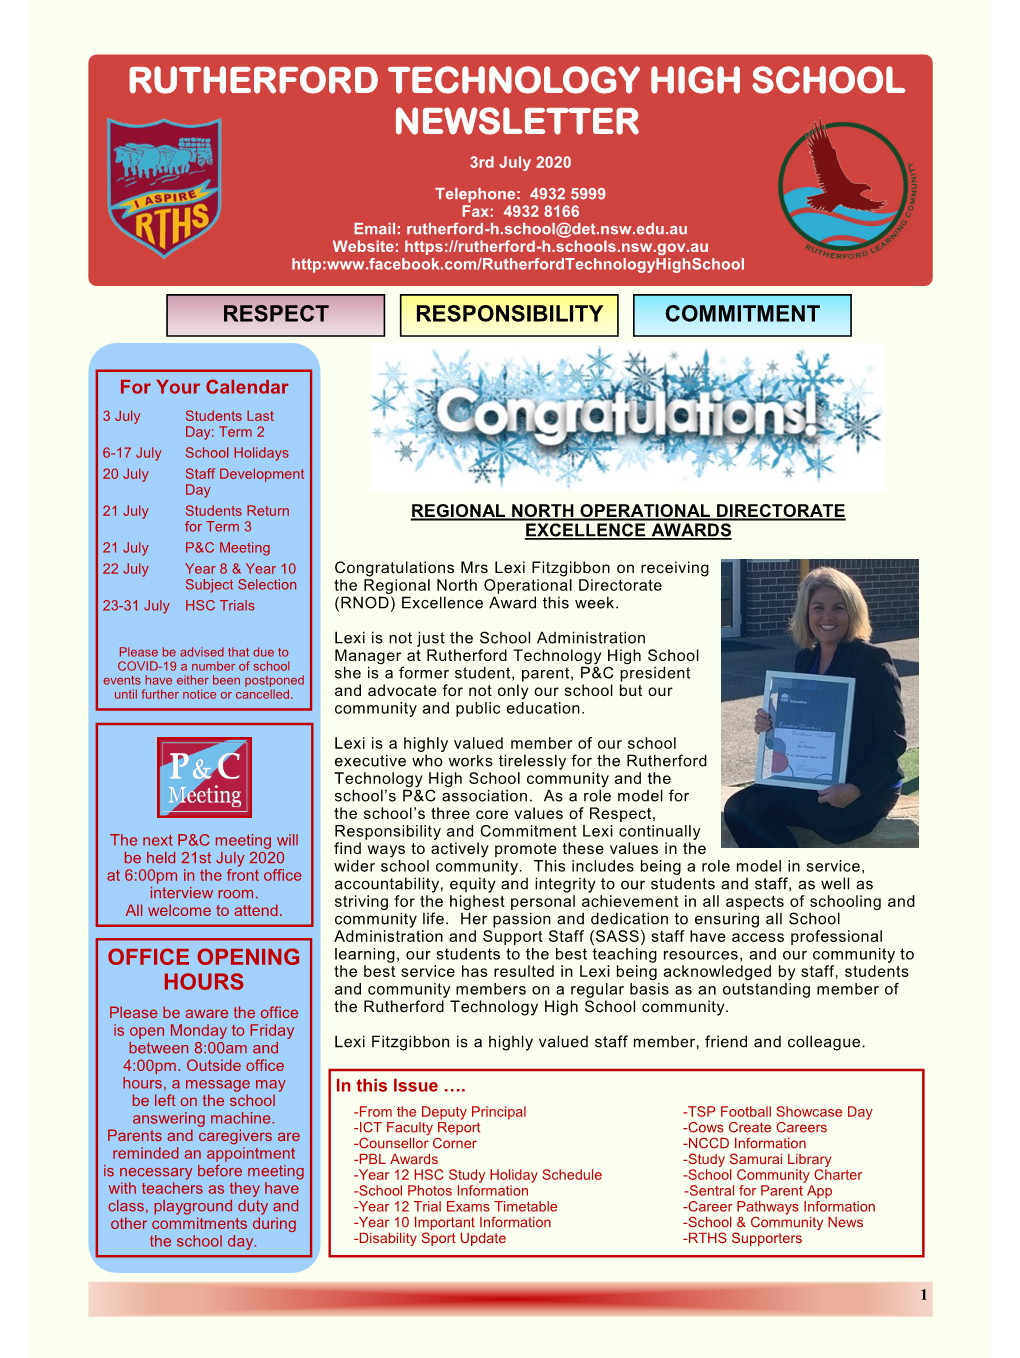 RUTHERFORD TECHNOLOGY HIGH SCHOOL NEWSLETTER 3Rd July 2020